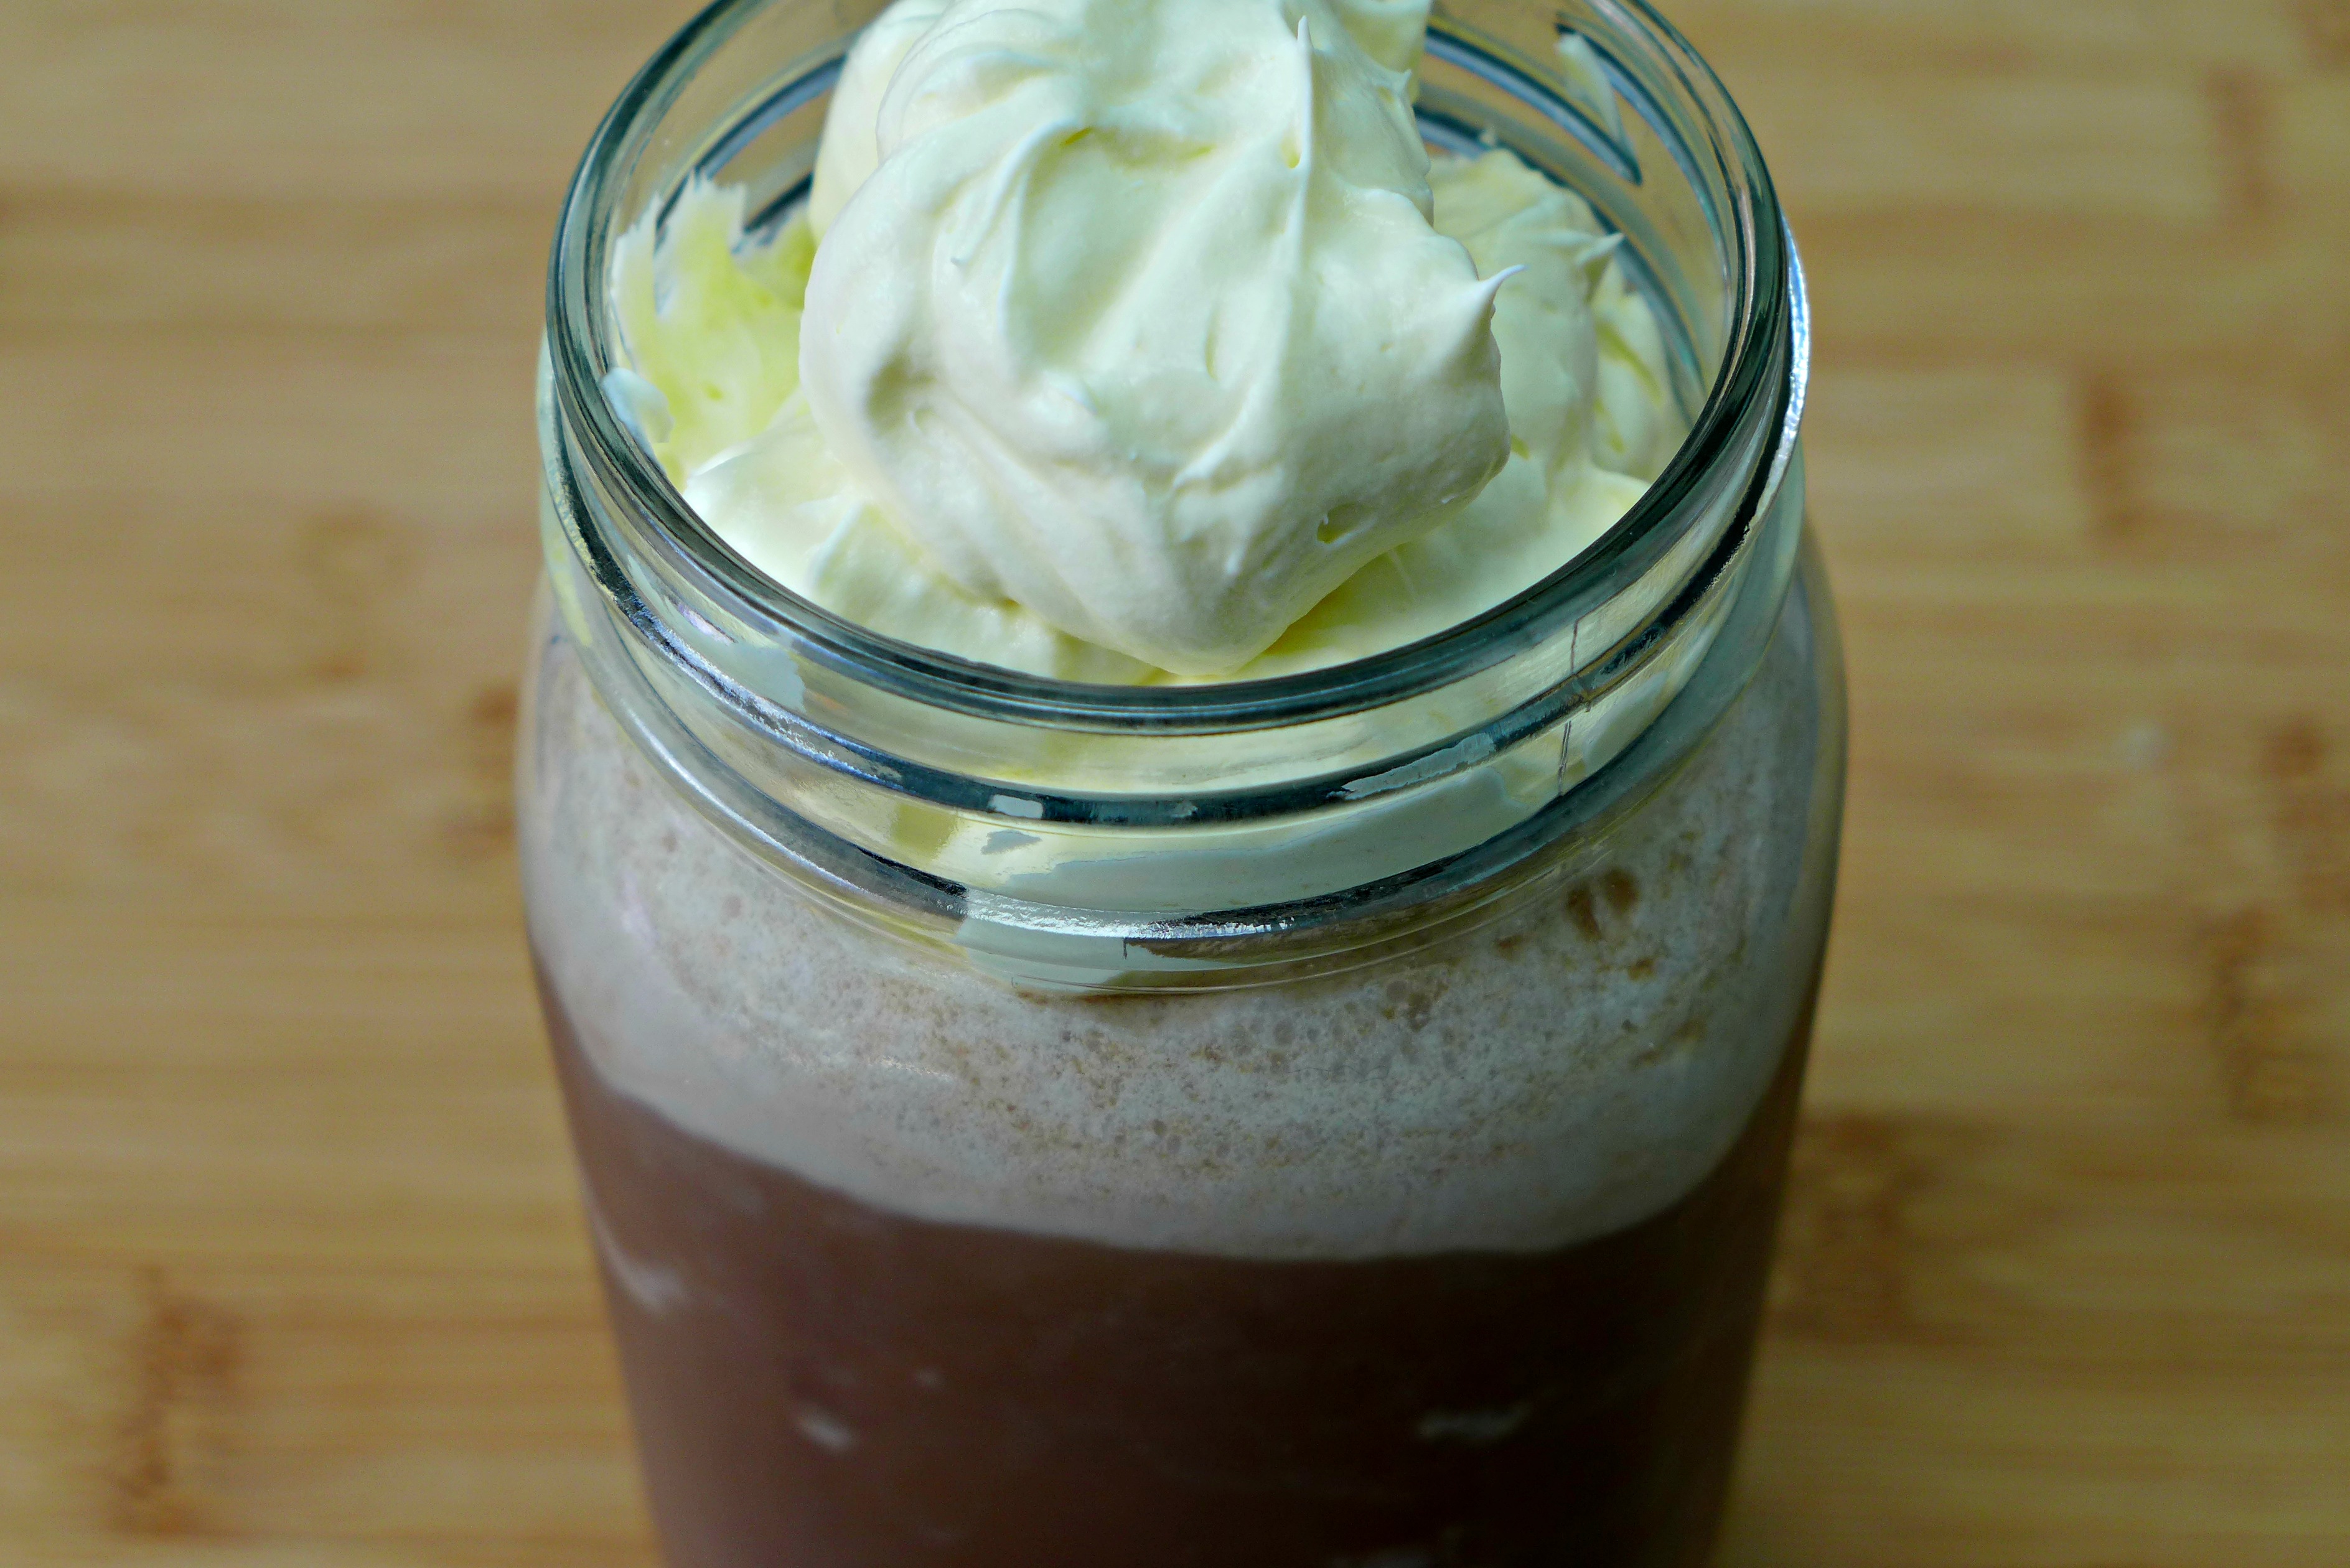 Chocolate Frappuccino topped with whipped cream